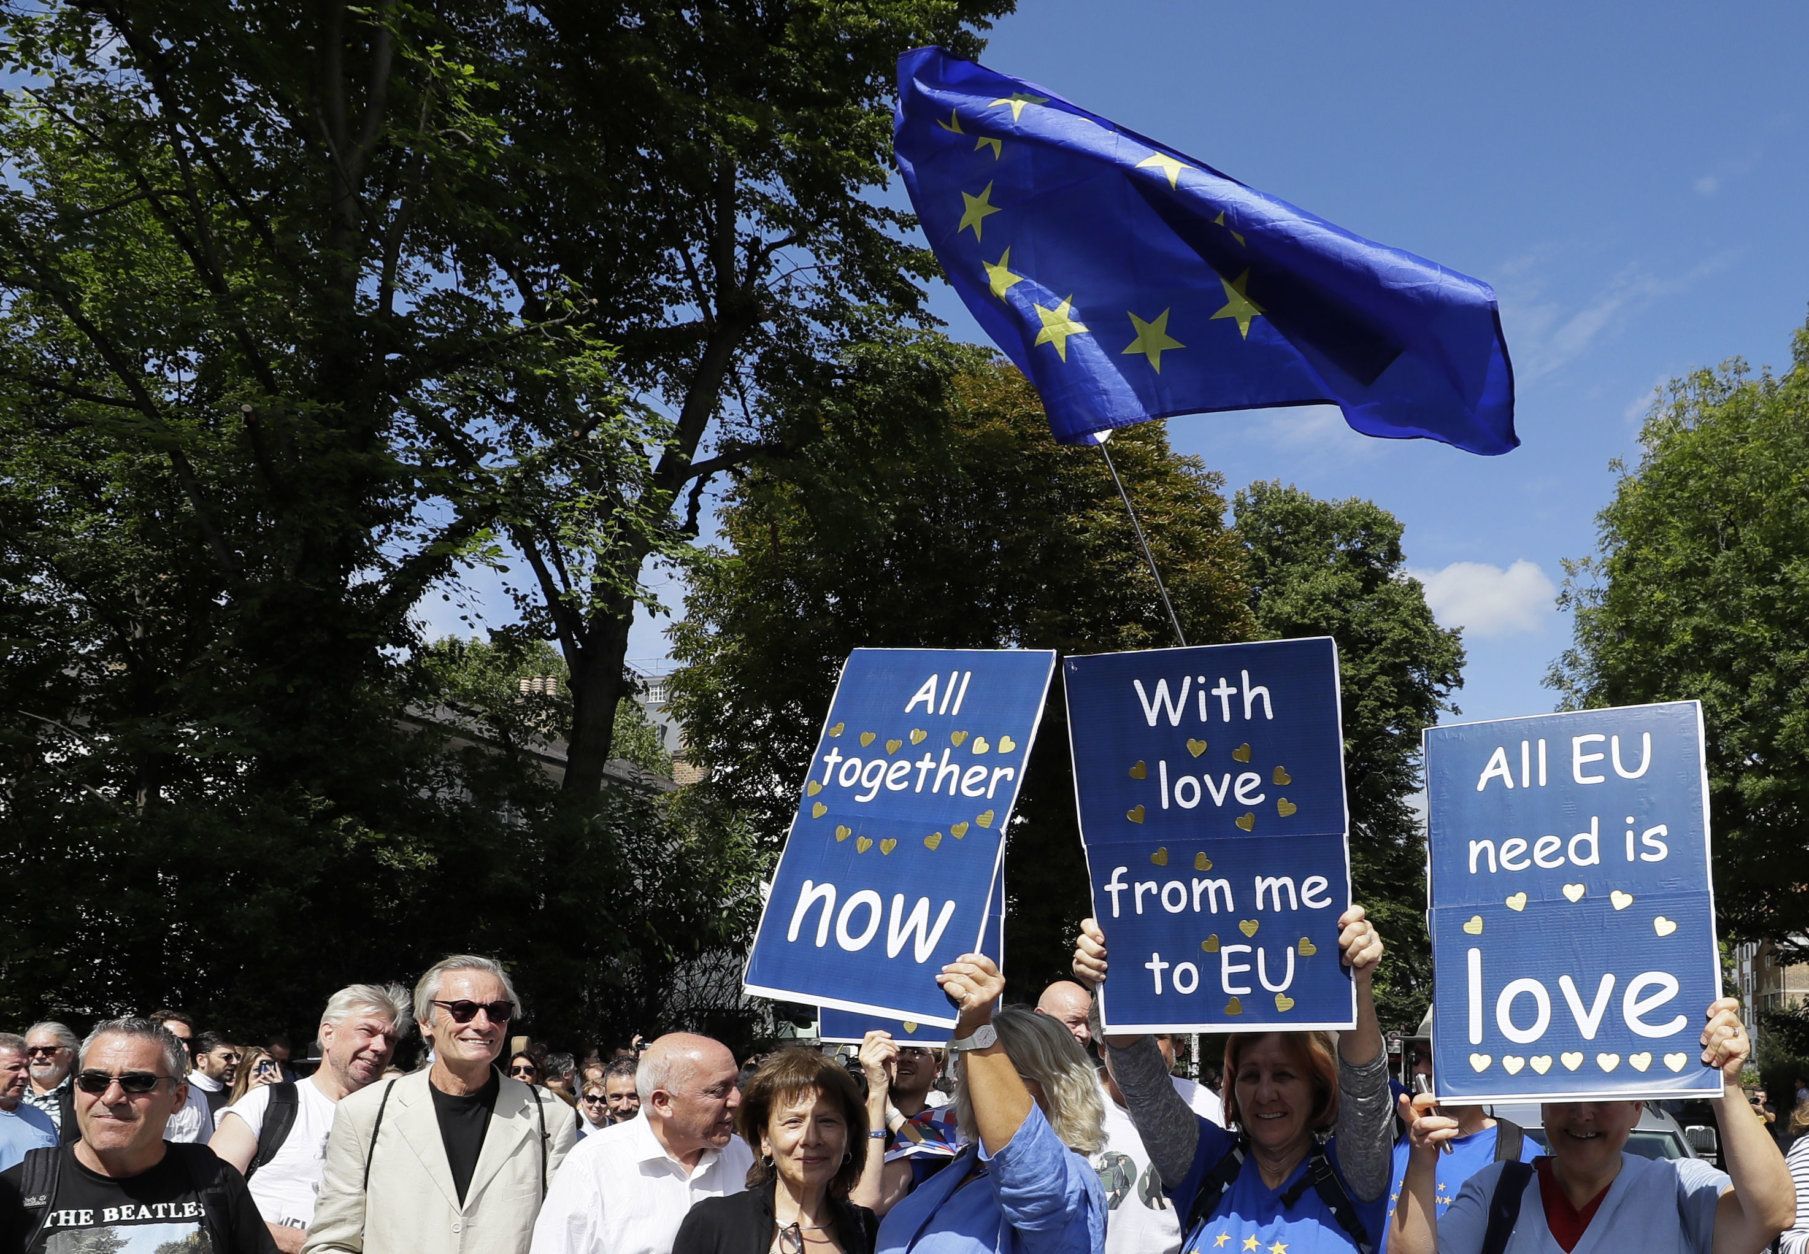 Anti Brexit demonstrators join Beatles fans, with signs reflecting Beatles songs, to walk across Abbey Road crossing on the 50th anniversary of British pop musicians The Beatles doing it, on Abbey Road in London, Thursday, Aug. 8, 2019. They aimed to cross 50 years to the minute since the 'Fab Four' were photographed for the Abbey Road album. (AP Photo/Kirsty Wigglesworth)